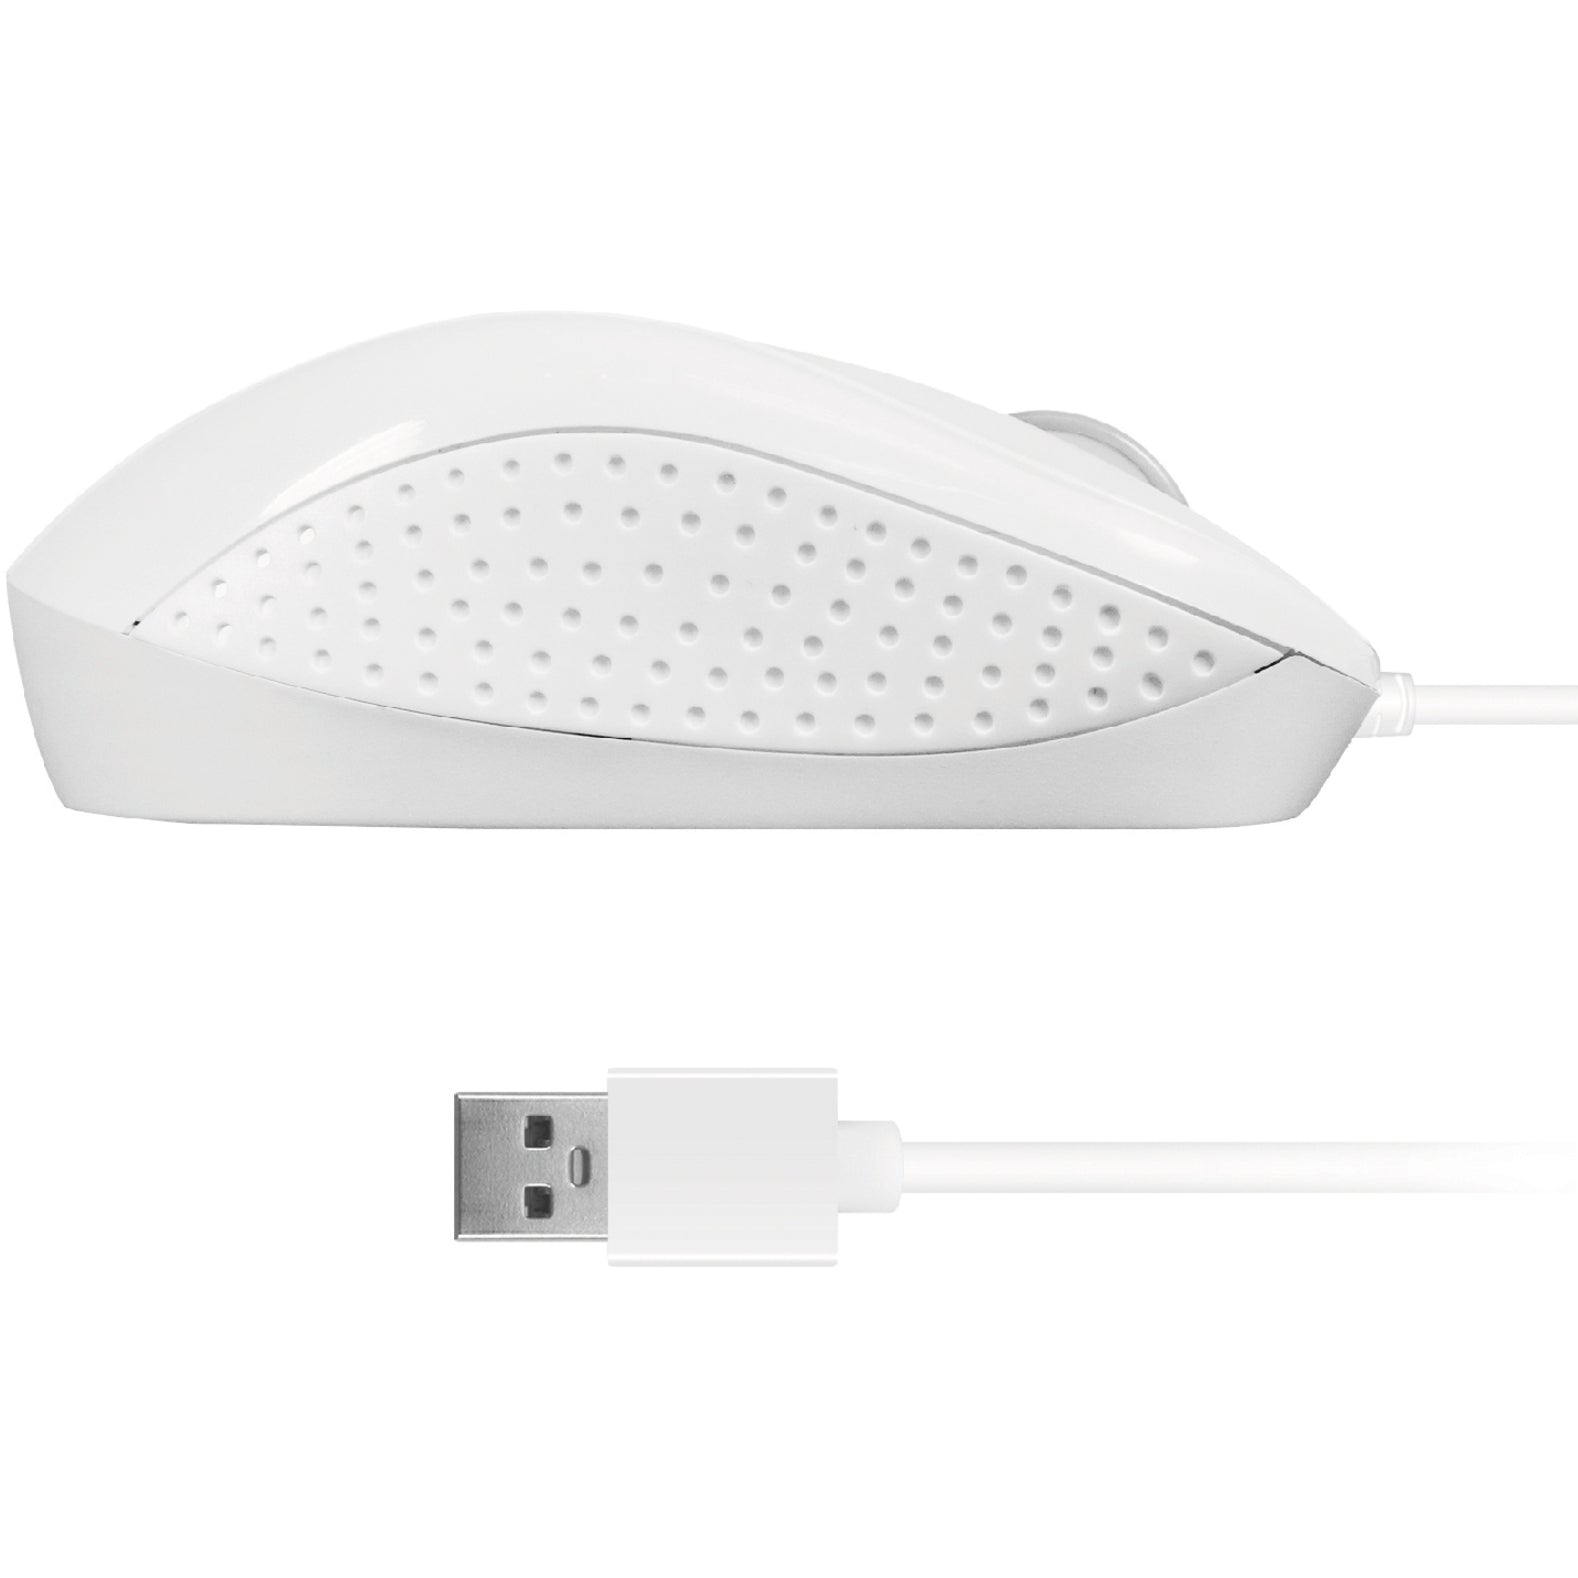 Macally TURBO 3 Button Optical USB Wired Mouse for Mac and PC, Ergonomic Fit, 1000 dpi, Scroll Wheel